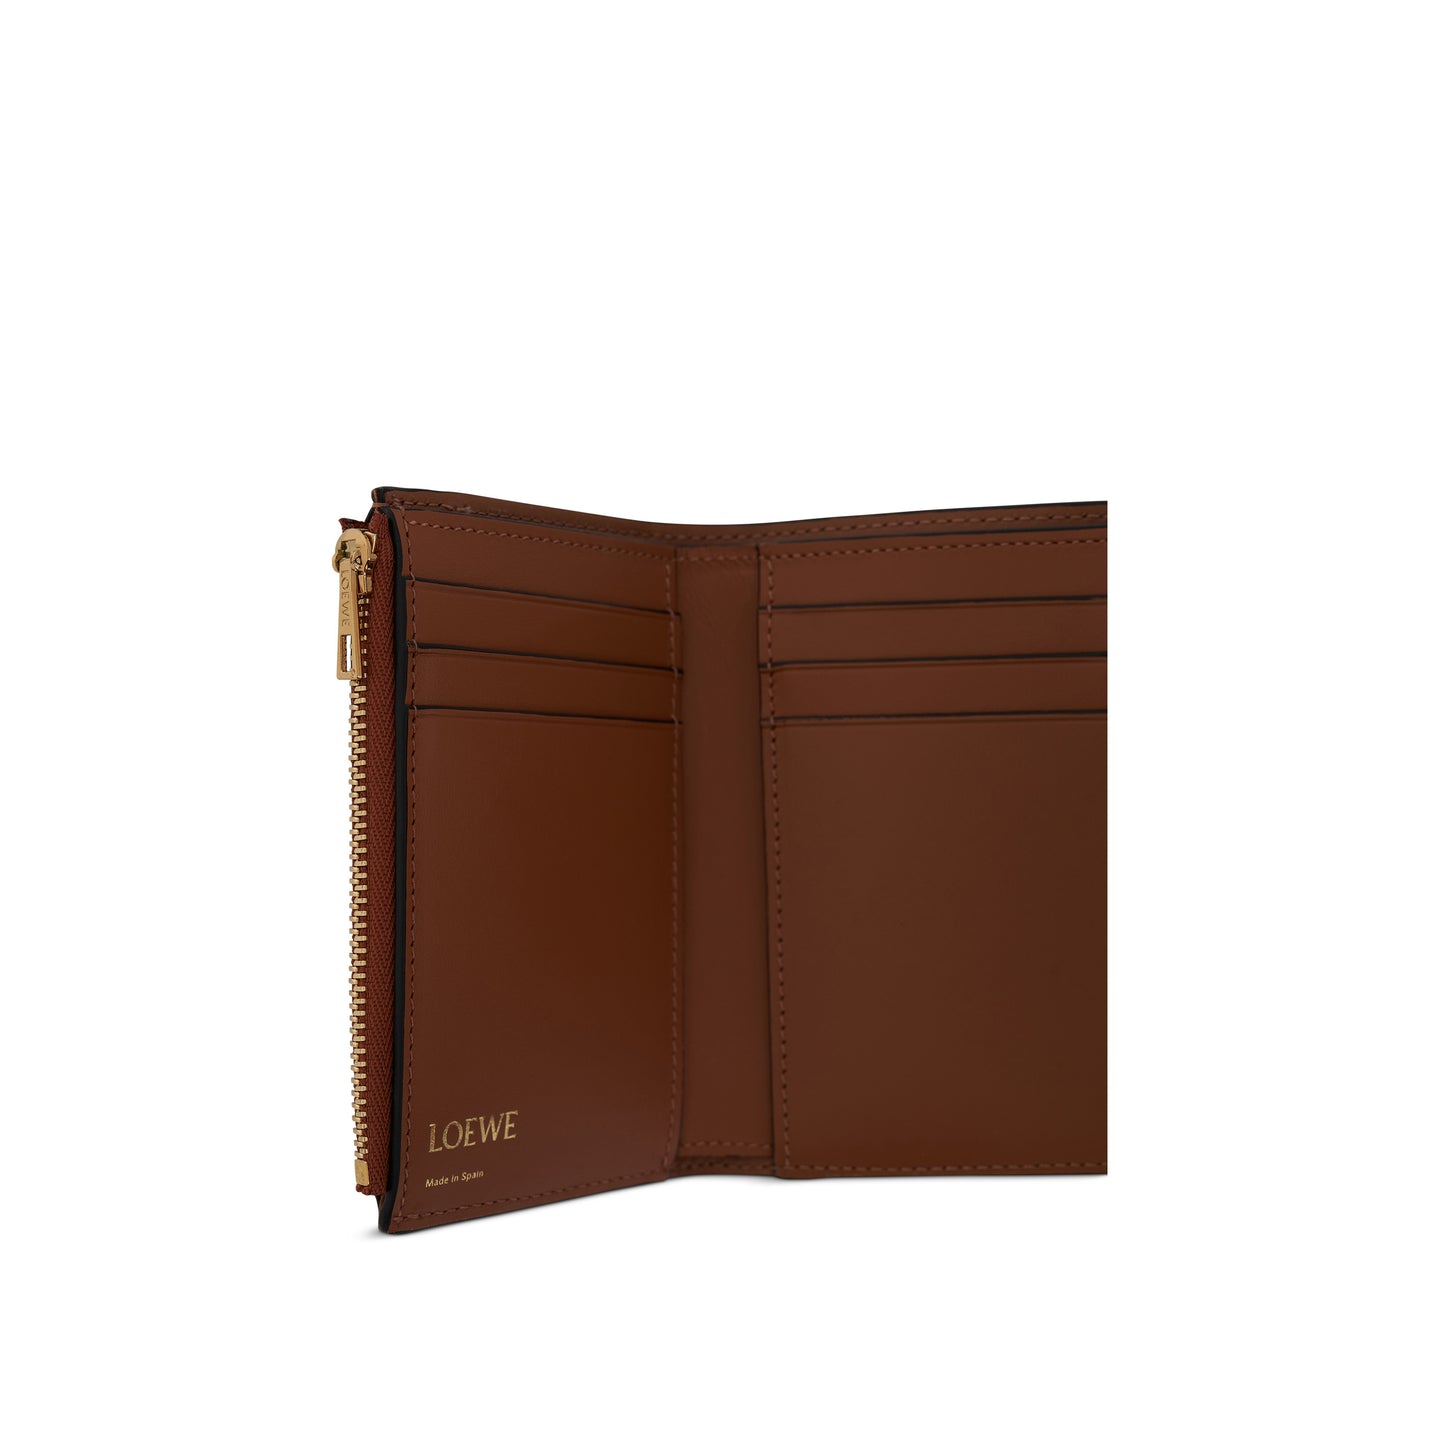 Repeat Small Vertical Wallet in Embossed Calf Leather in Tan